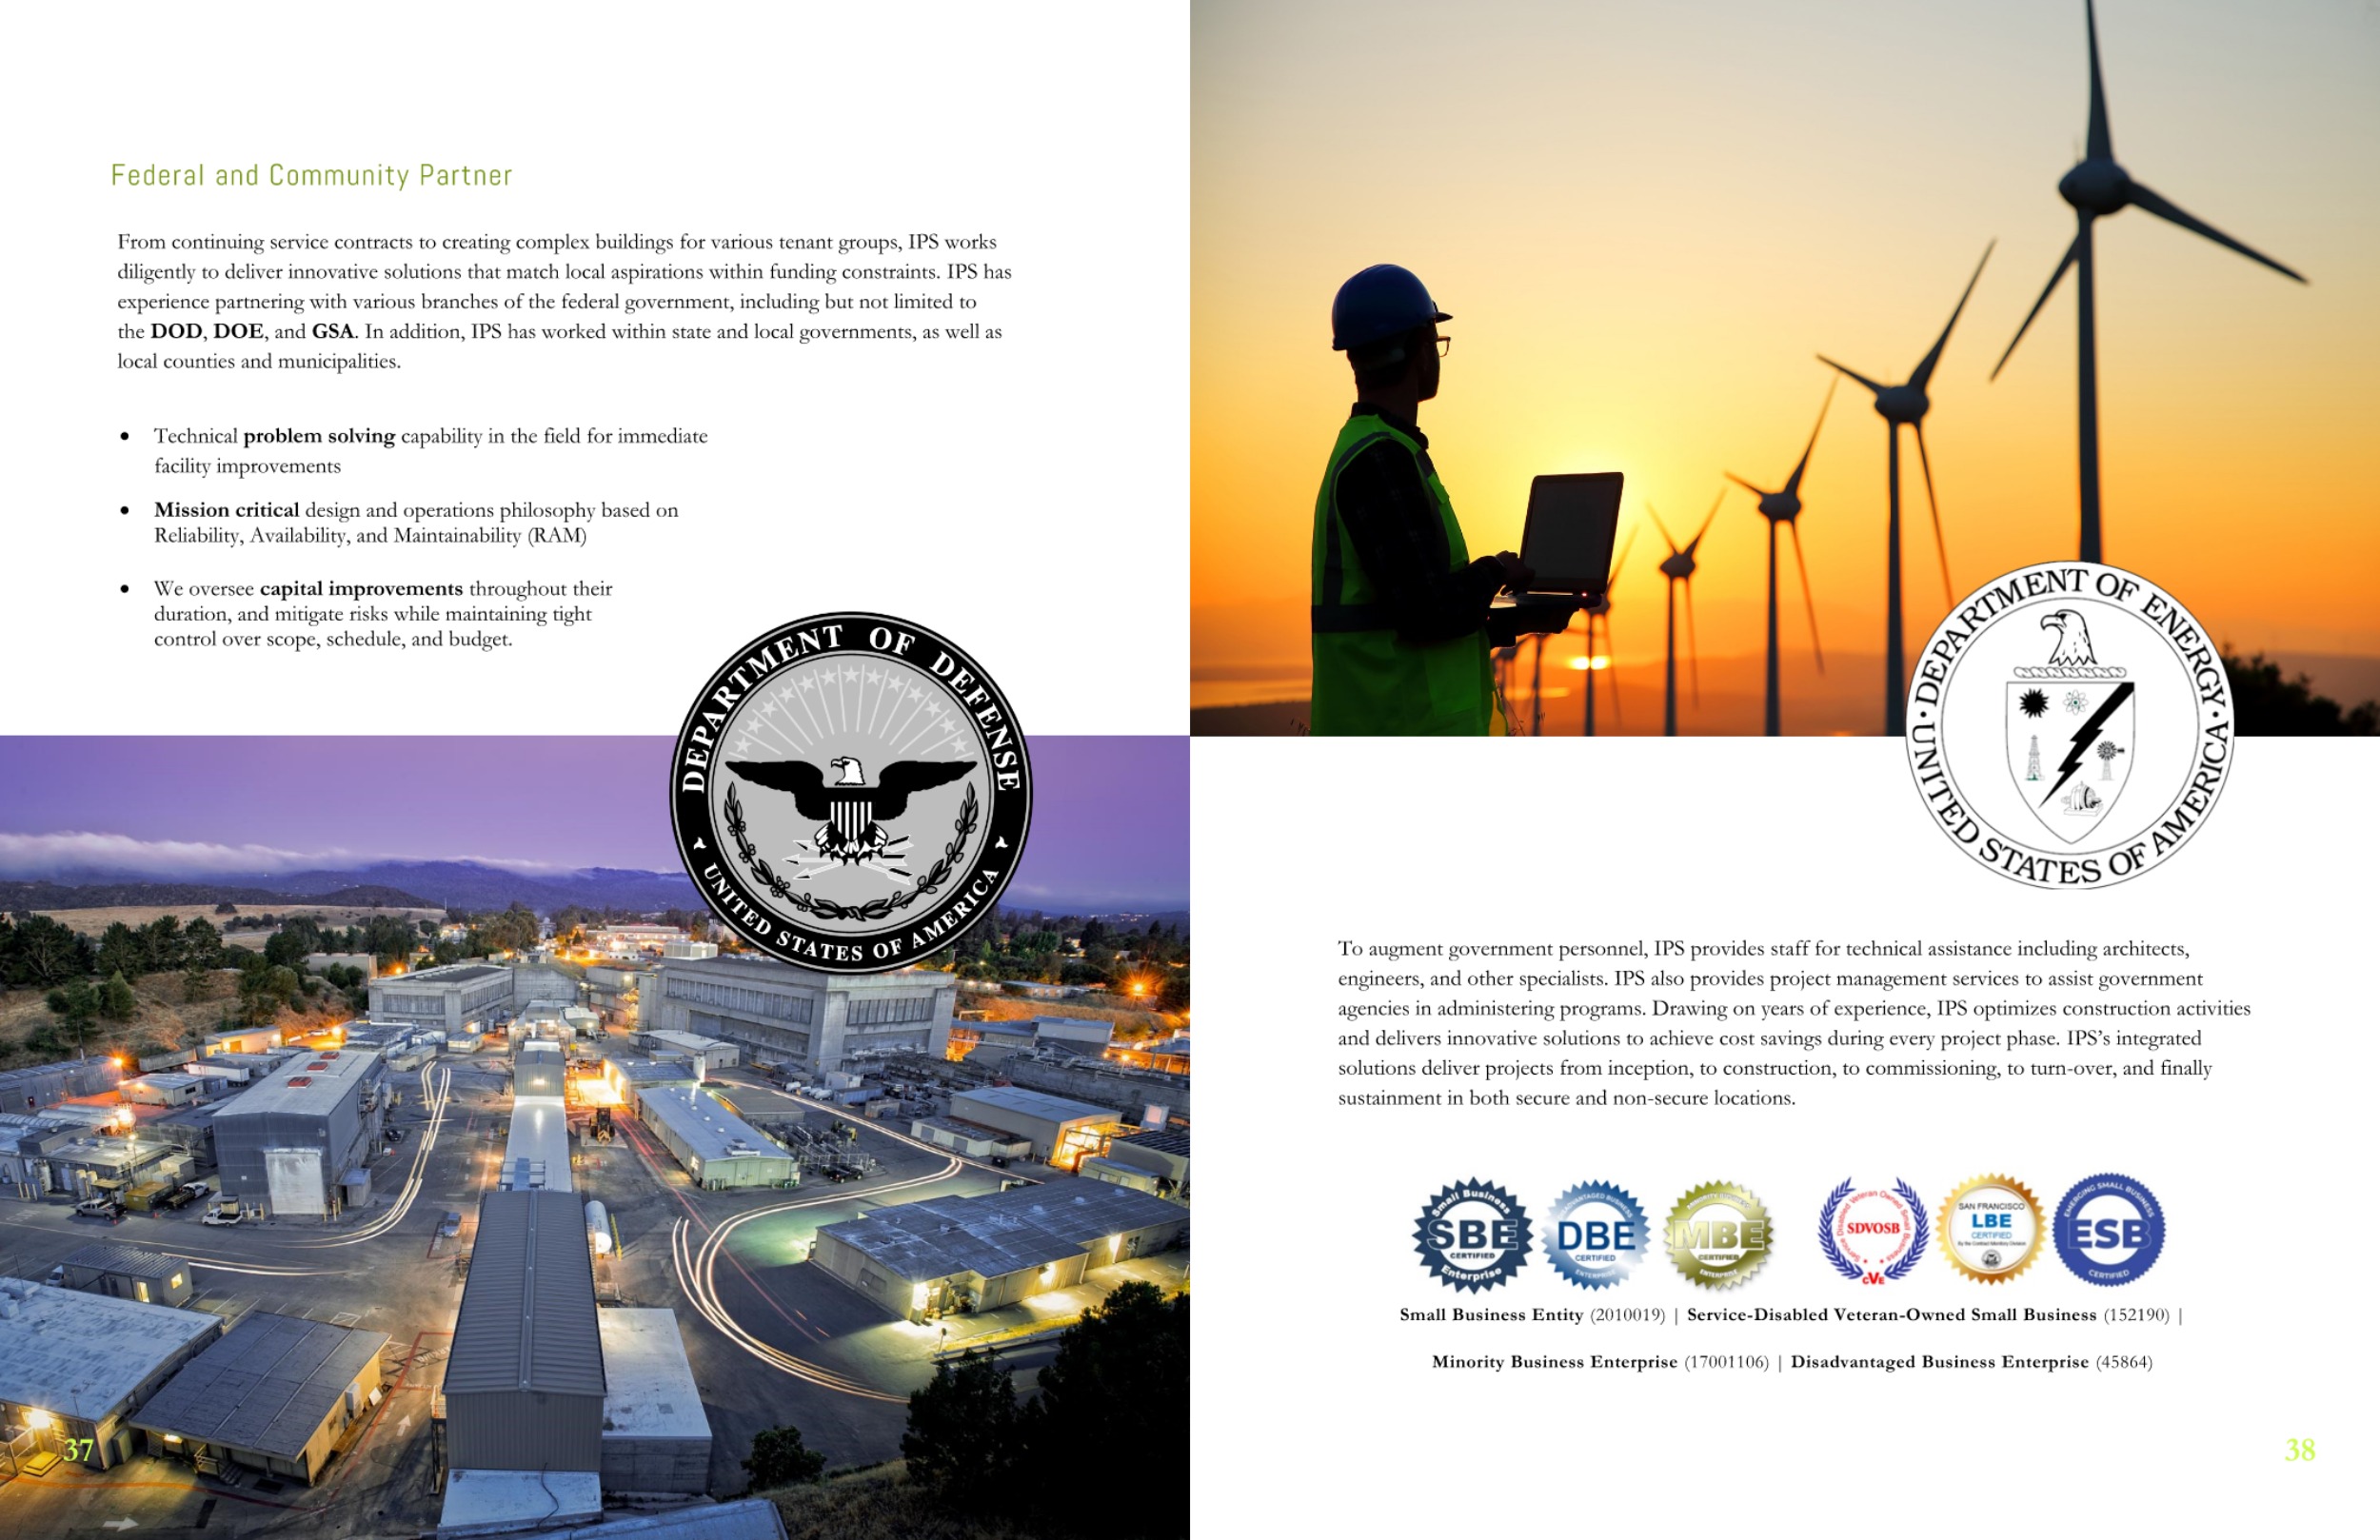 IPS Capabilities Booklet with Government services, capabilities, and methods.